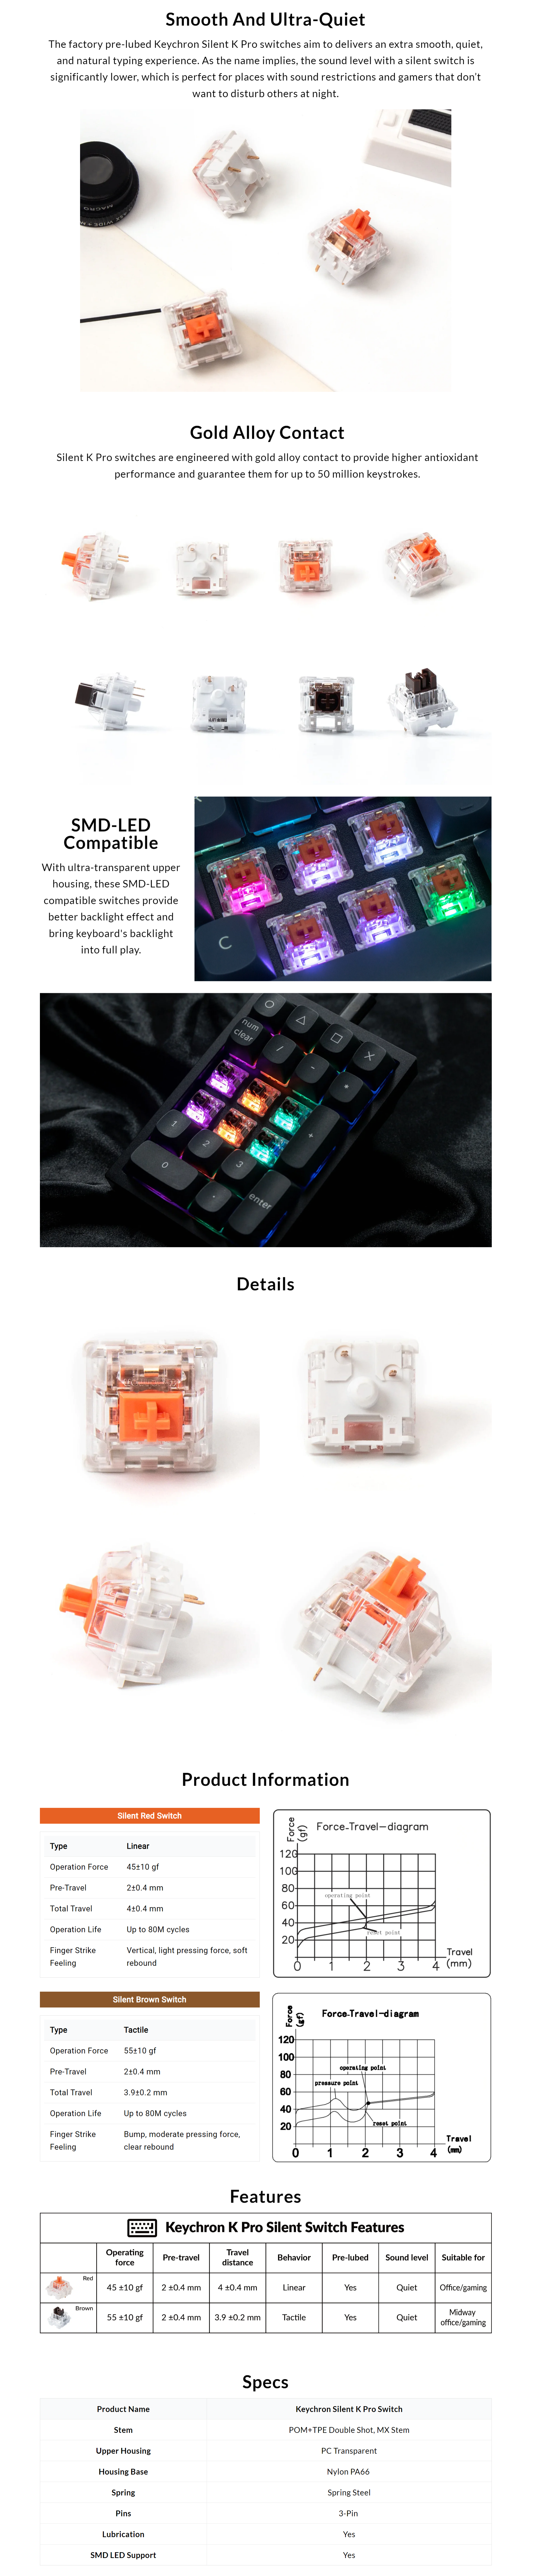 A large marketing image providing additional information about the product Keychron Silent K Pro Switch 110 pcs- Red - Additional alt info not provided